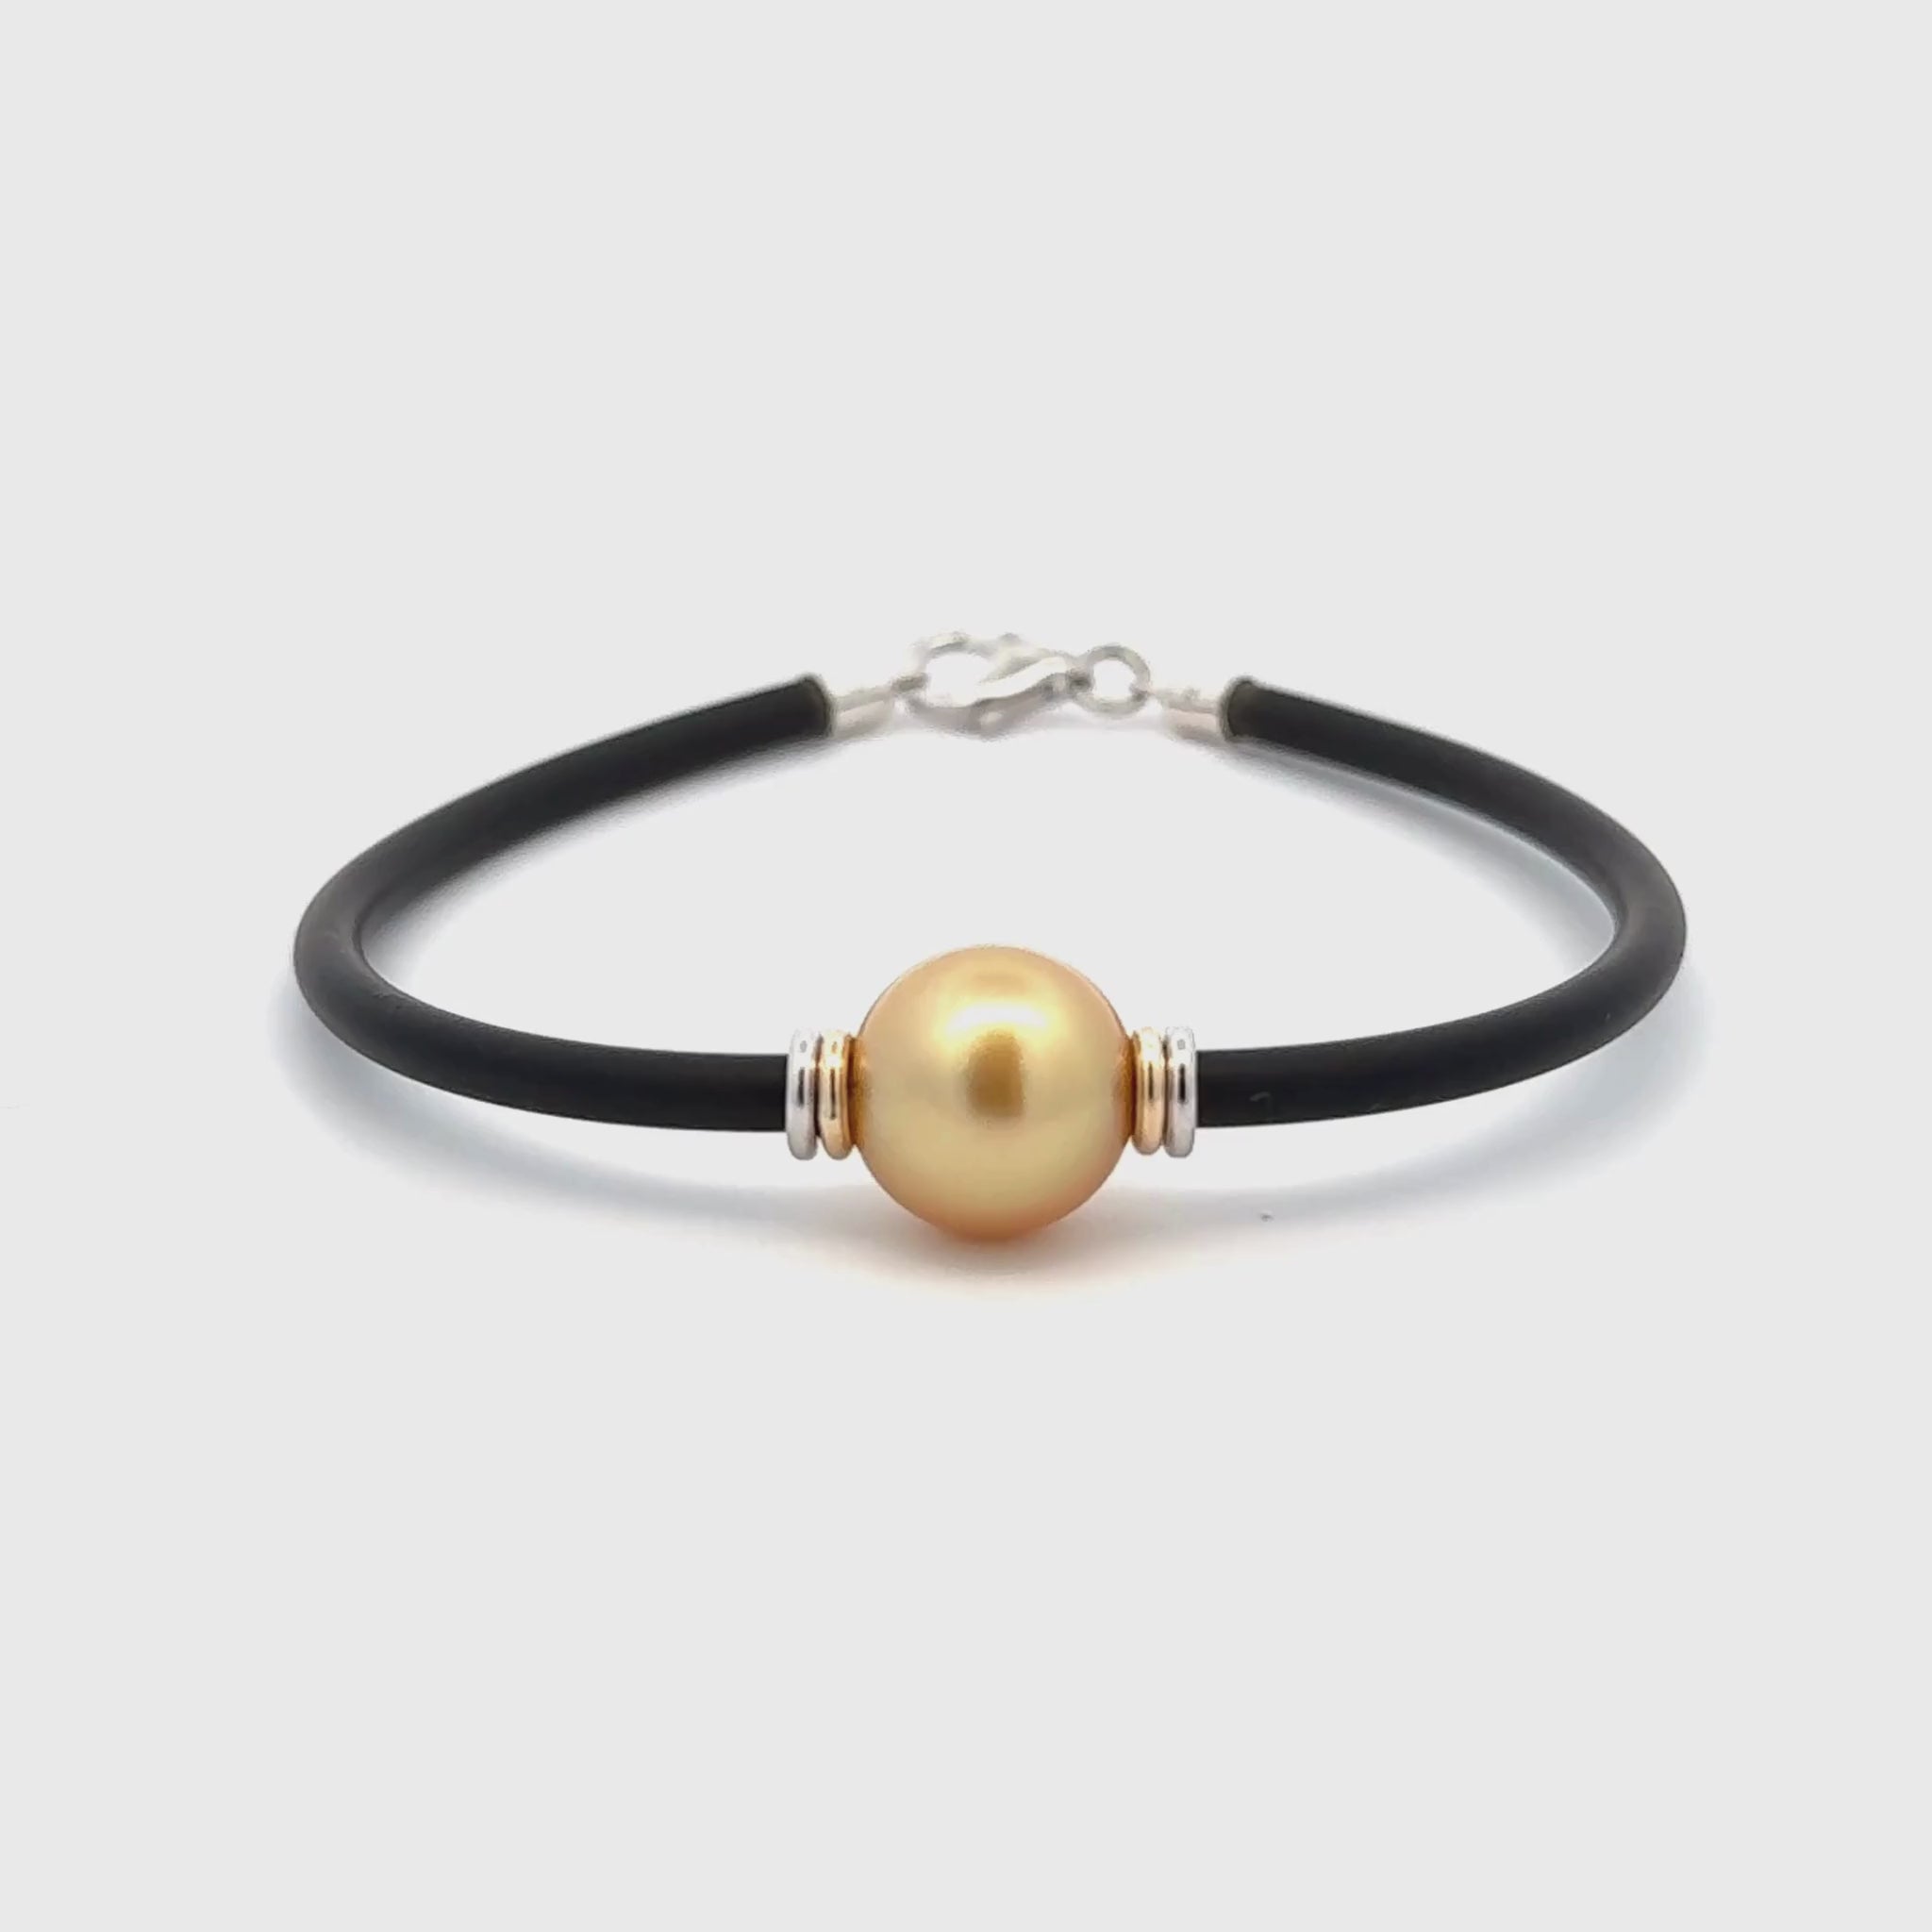 Sterling Silver and 9K Yellow Gold South Sea Cultured 11- 12mm Pearl Neoprene Bracelet